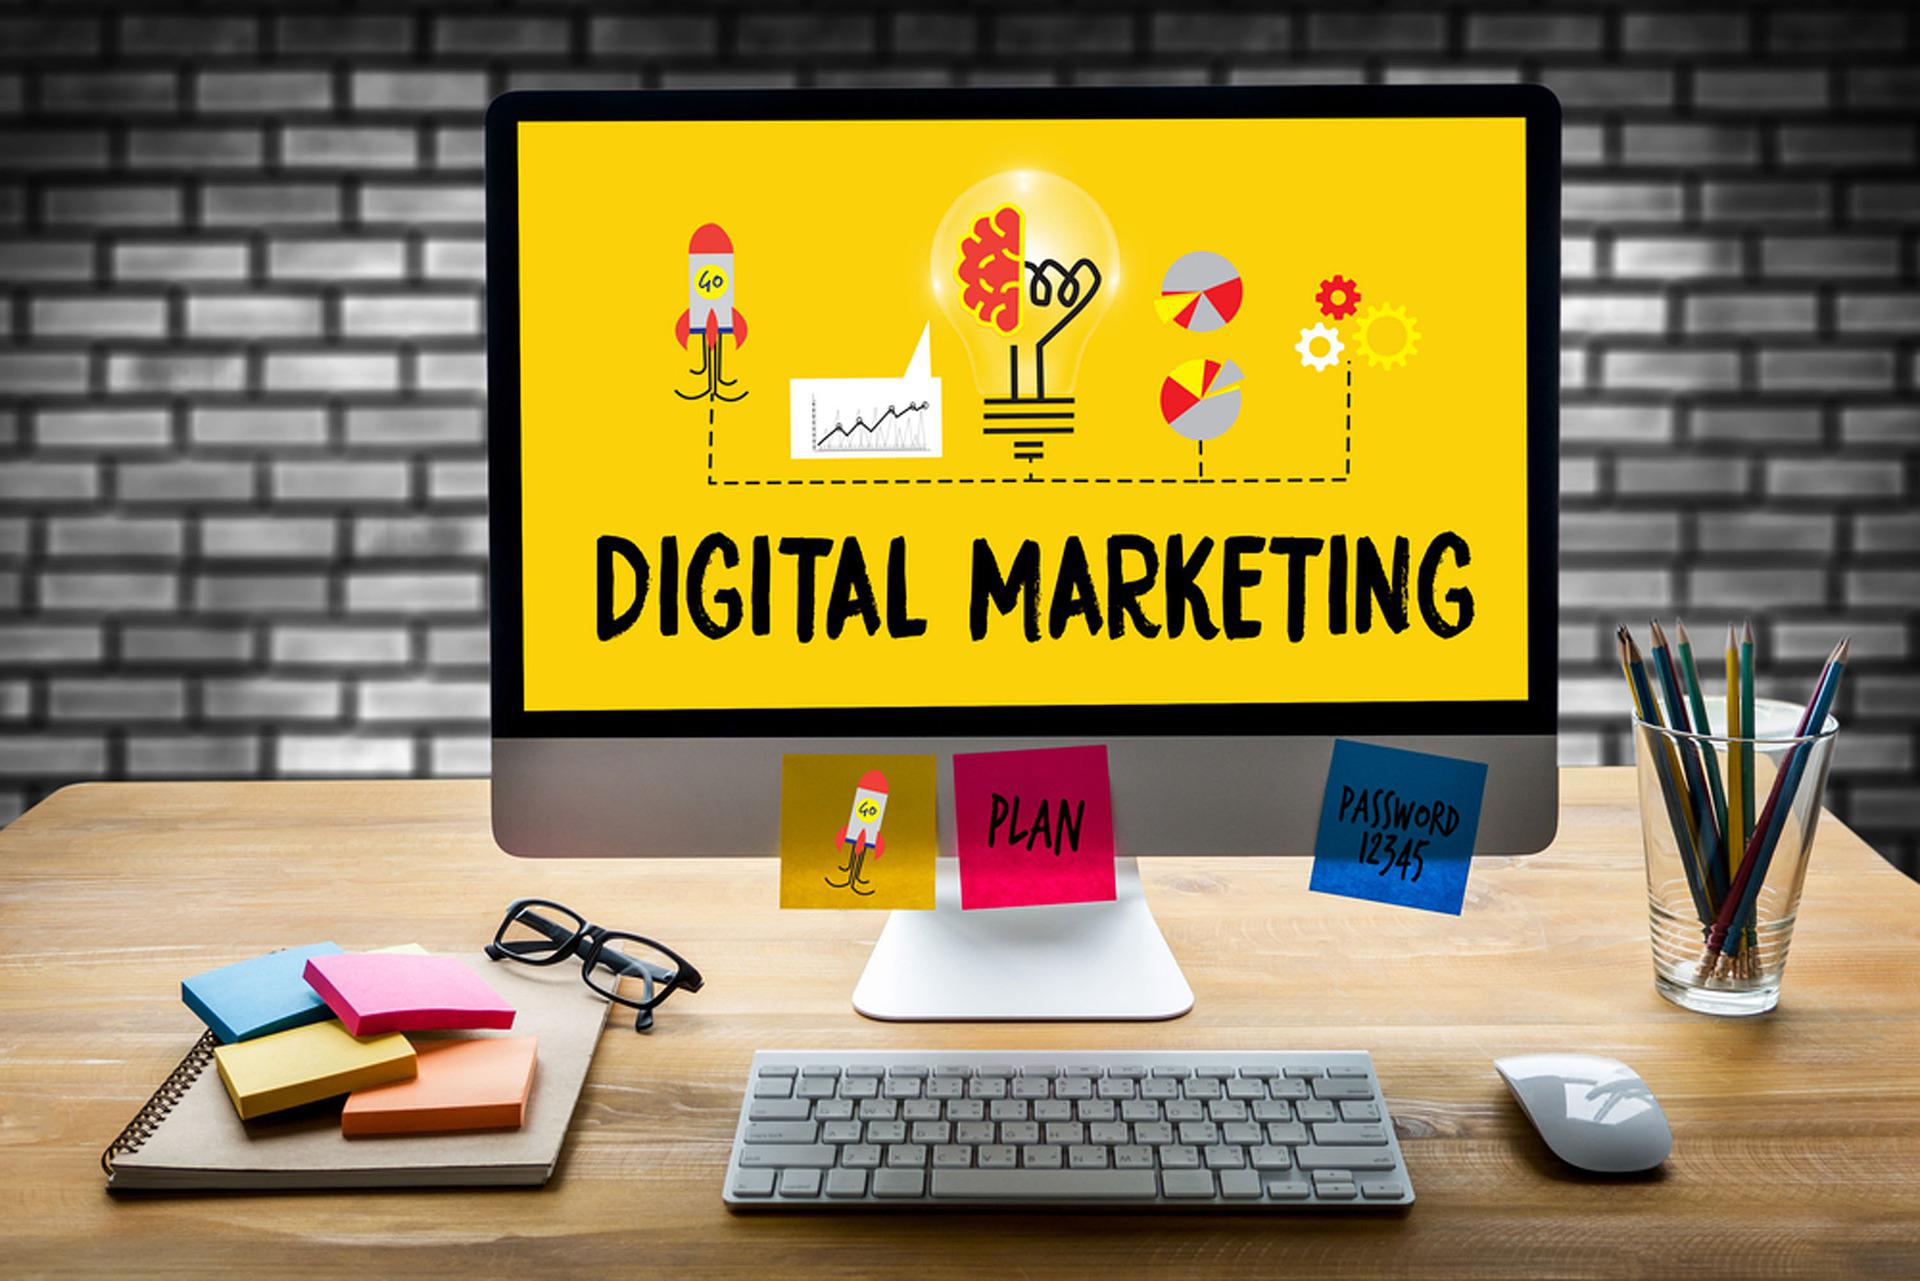 10 Things To Consider When Choosing Your Digital Marketing Agency